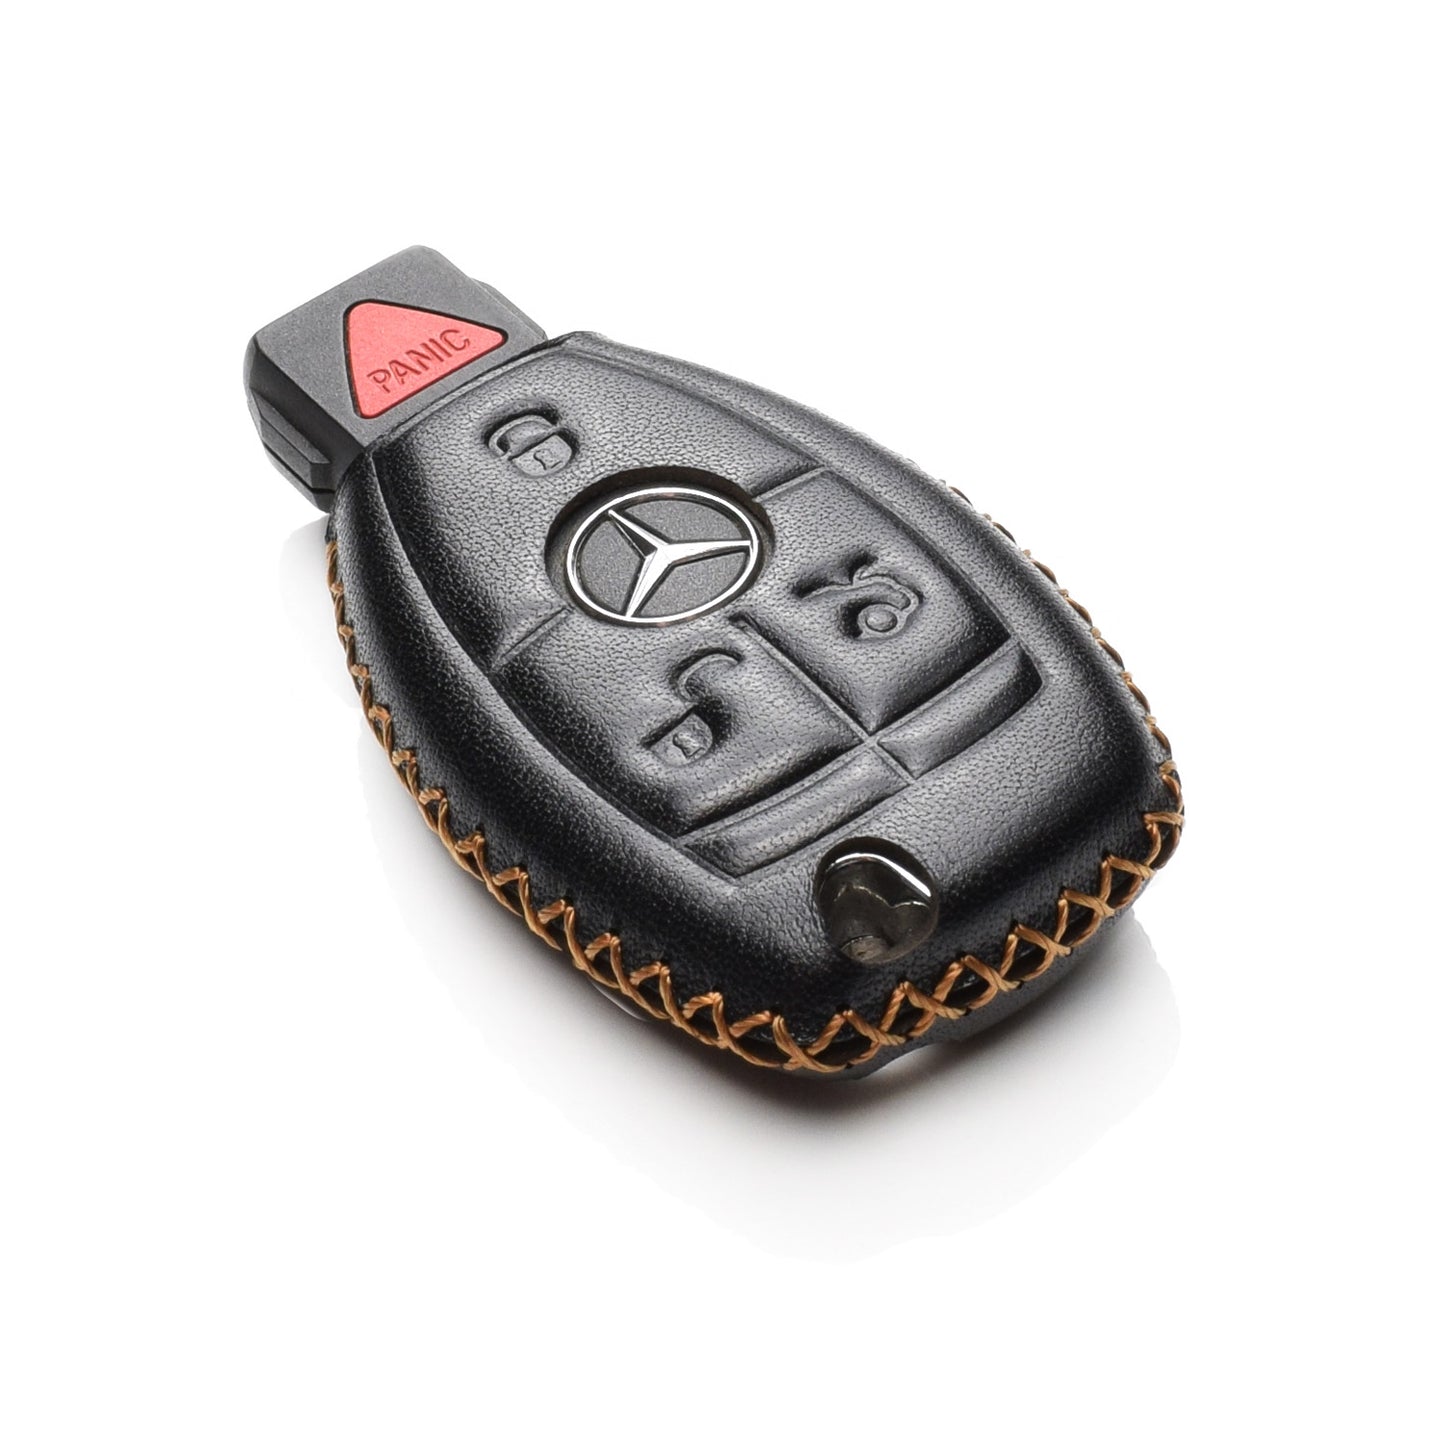 Vitodeco 3 or 4 Buttons Leather Smart Key Fob Case Cover Compatible for Mercedes Benz